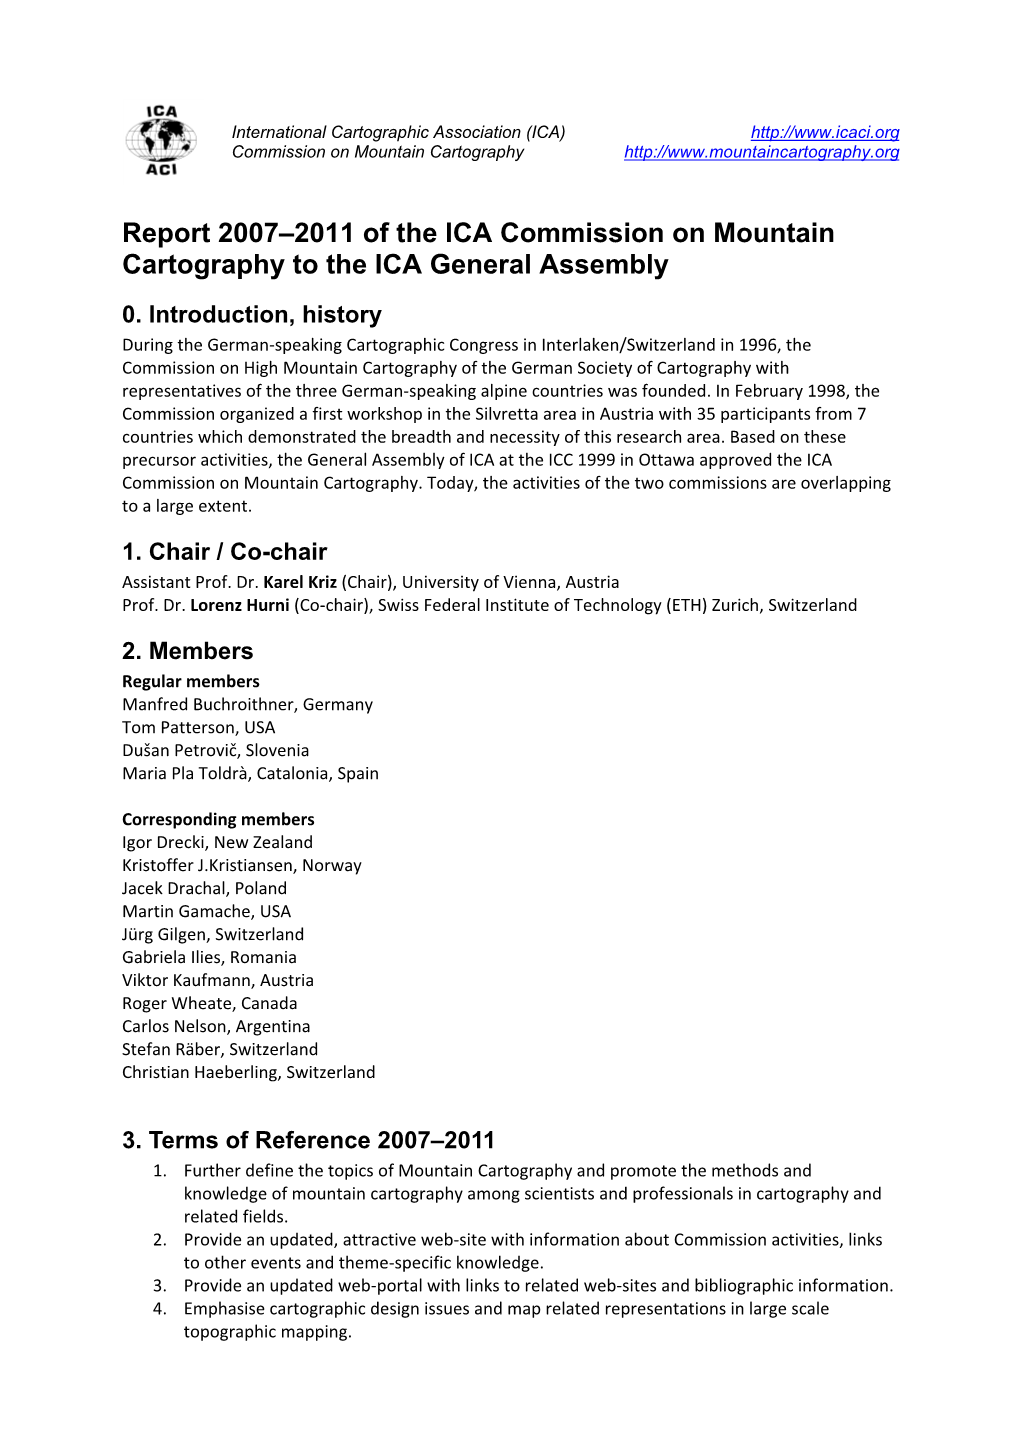 Report 2007–2011 of the ICA Commission on Mountain Cartography to the ICA General Assembly